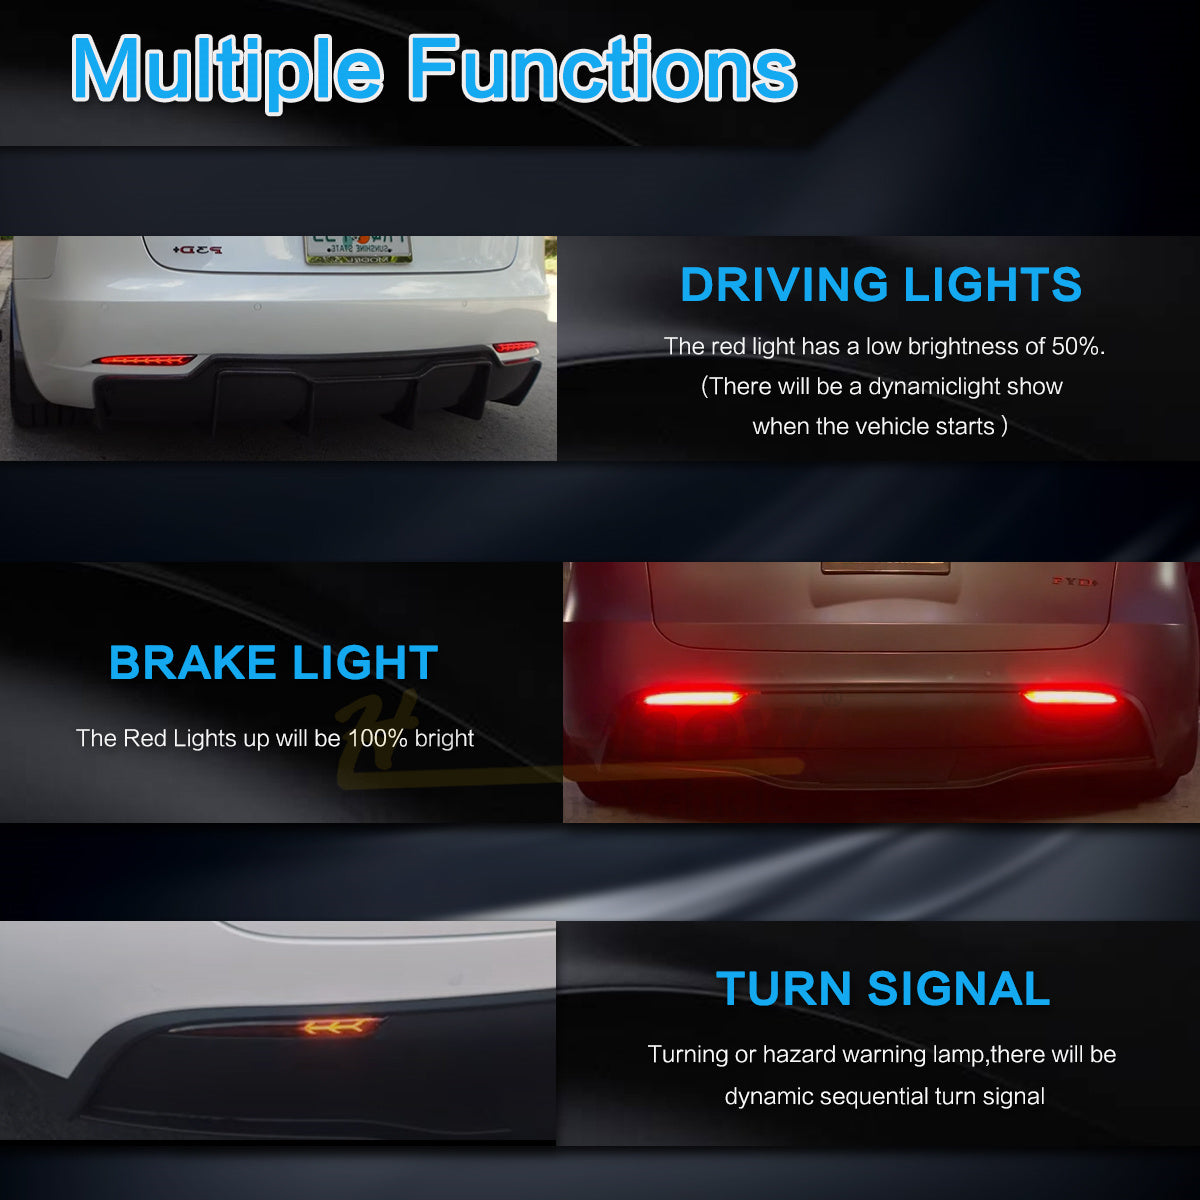 Mutiple functions for bumper tail light